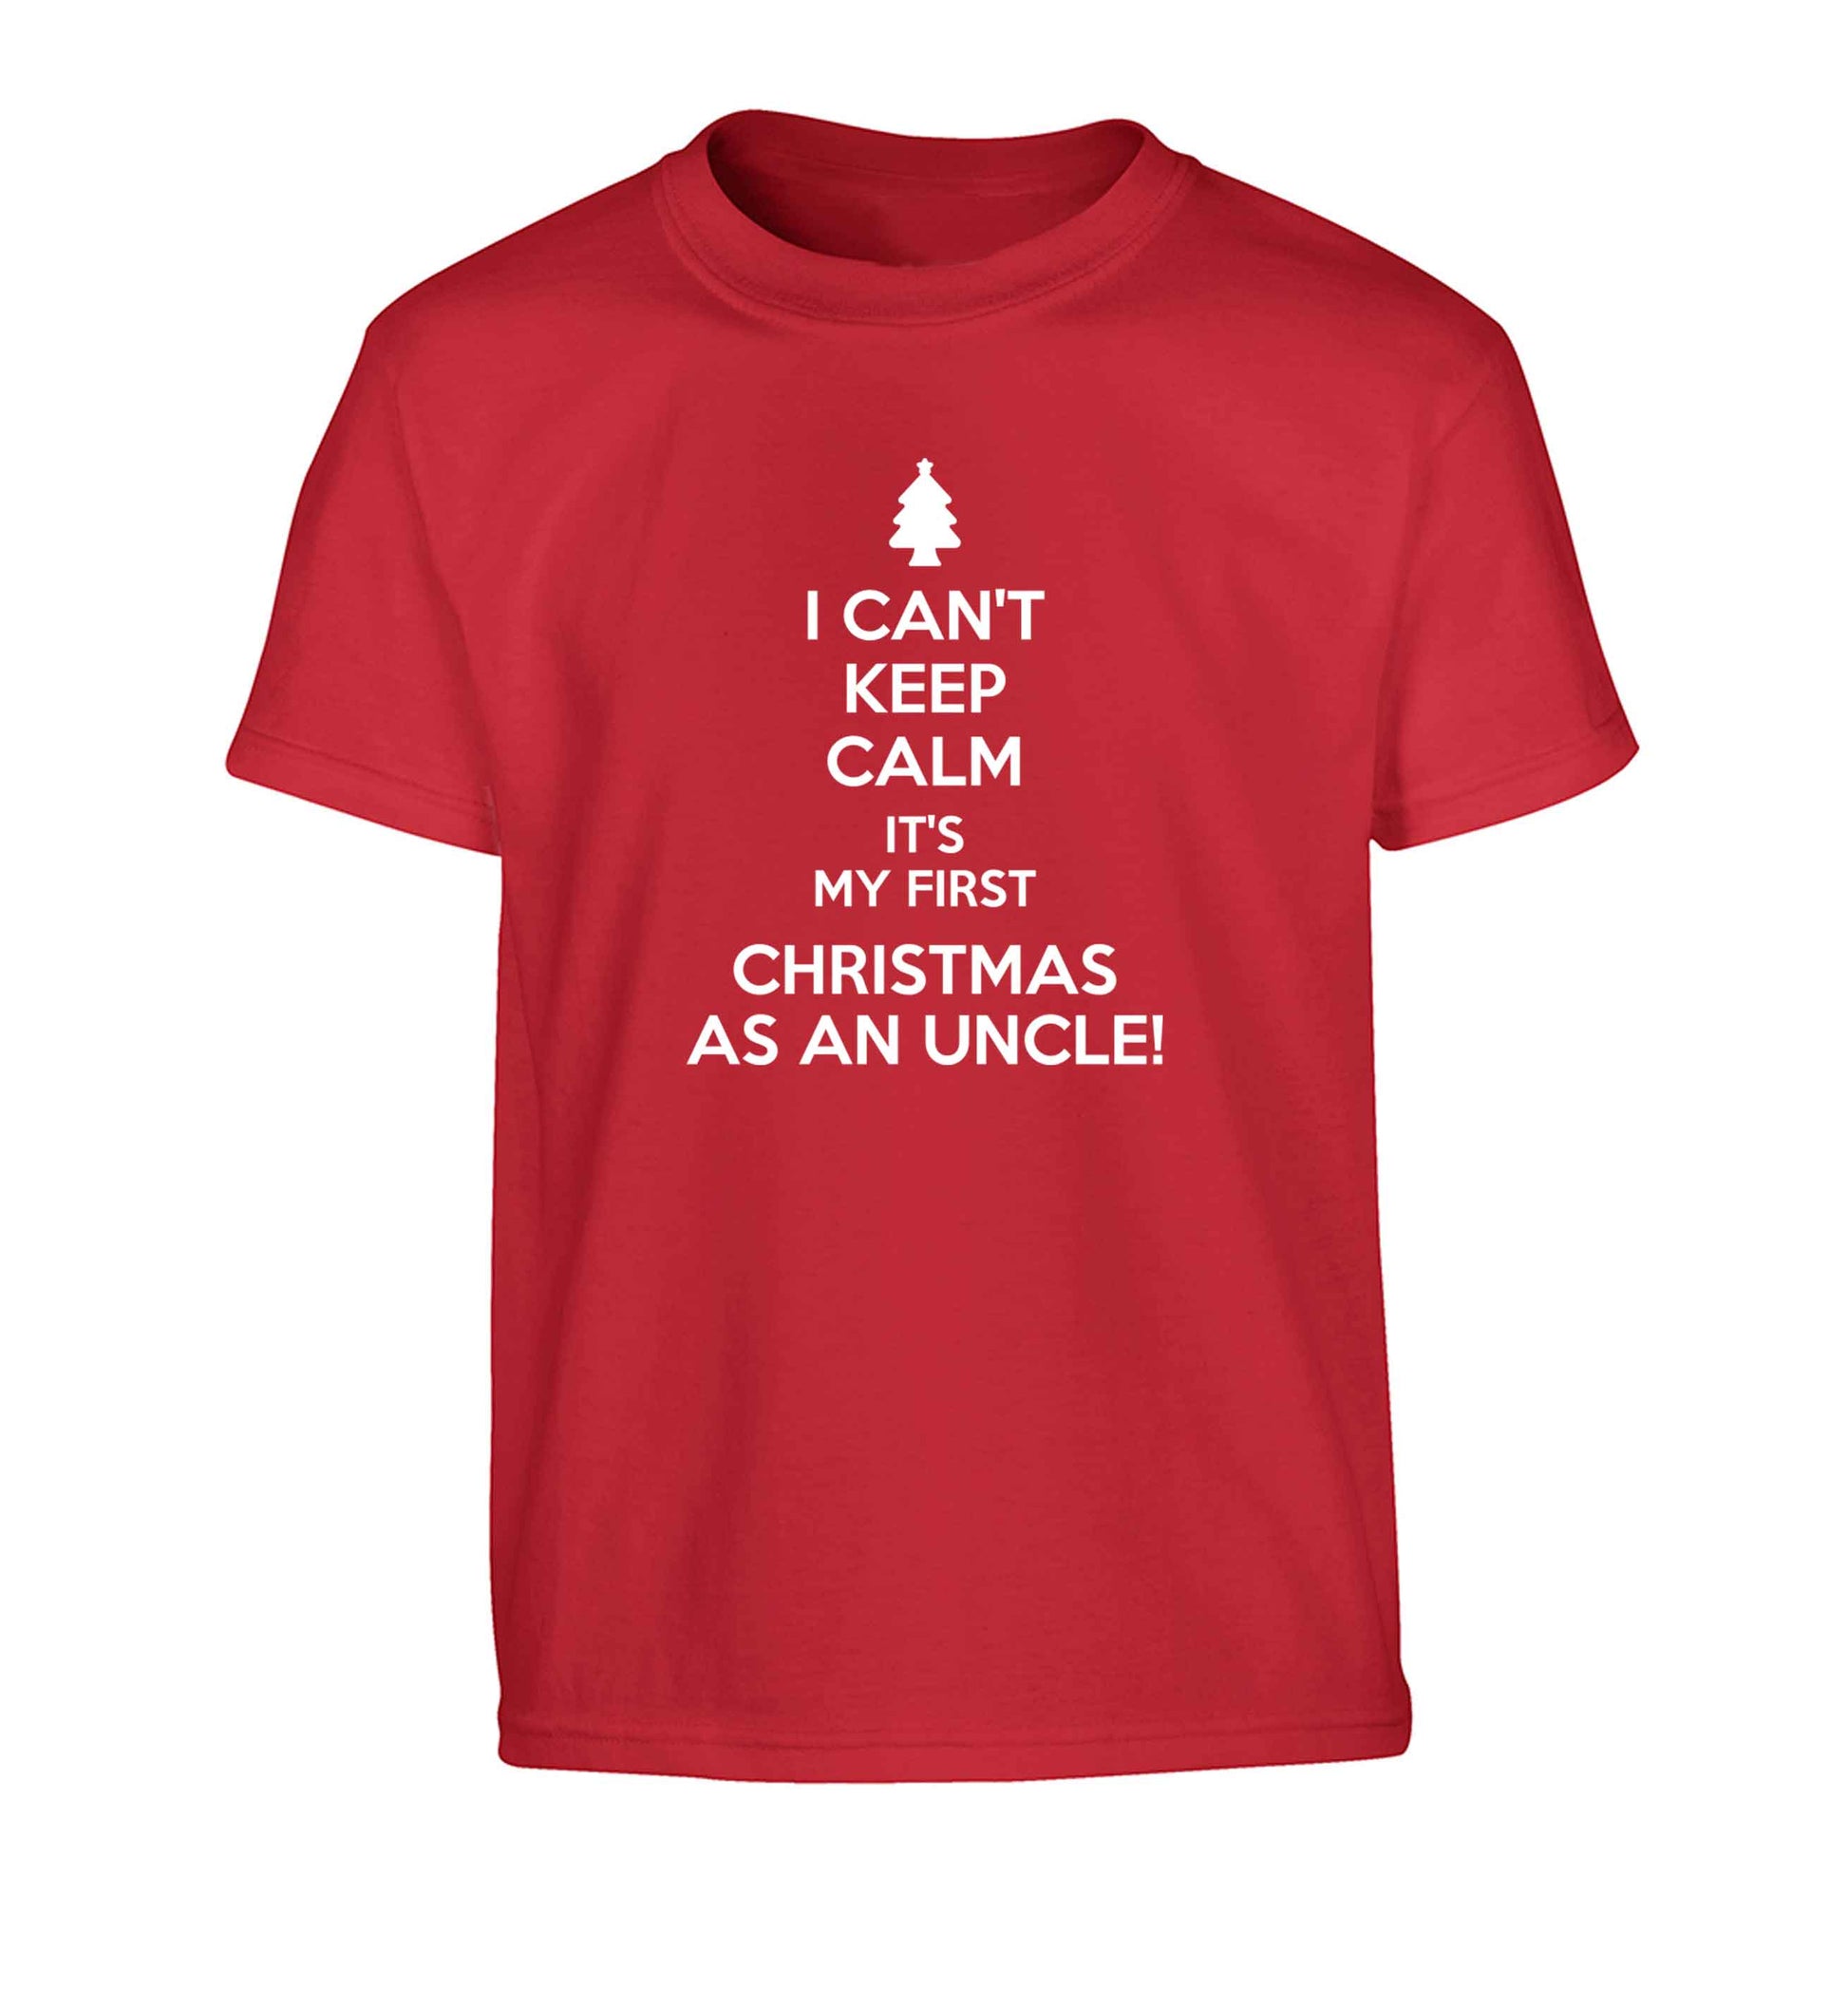 I can't keep calm it's my first Christmas as an uncle! Children's red Tshirt 12-13 Years